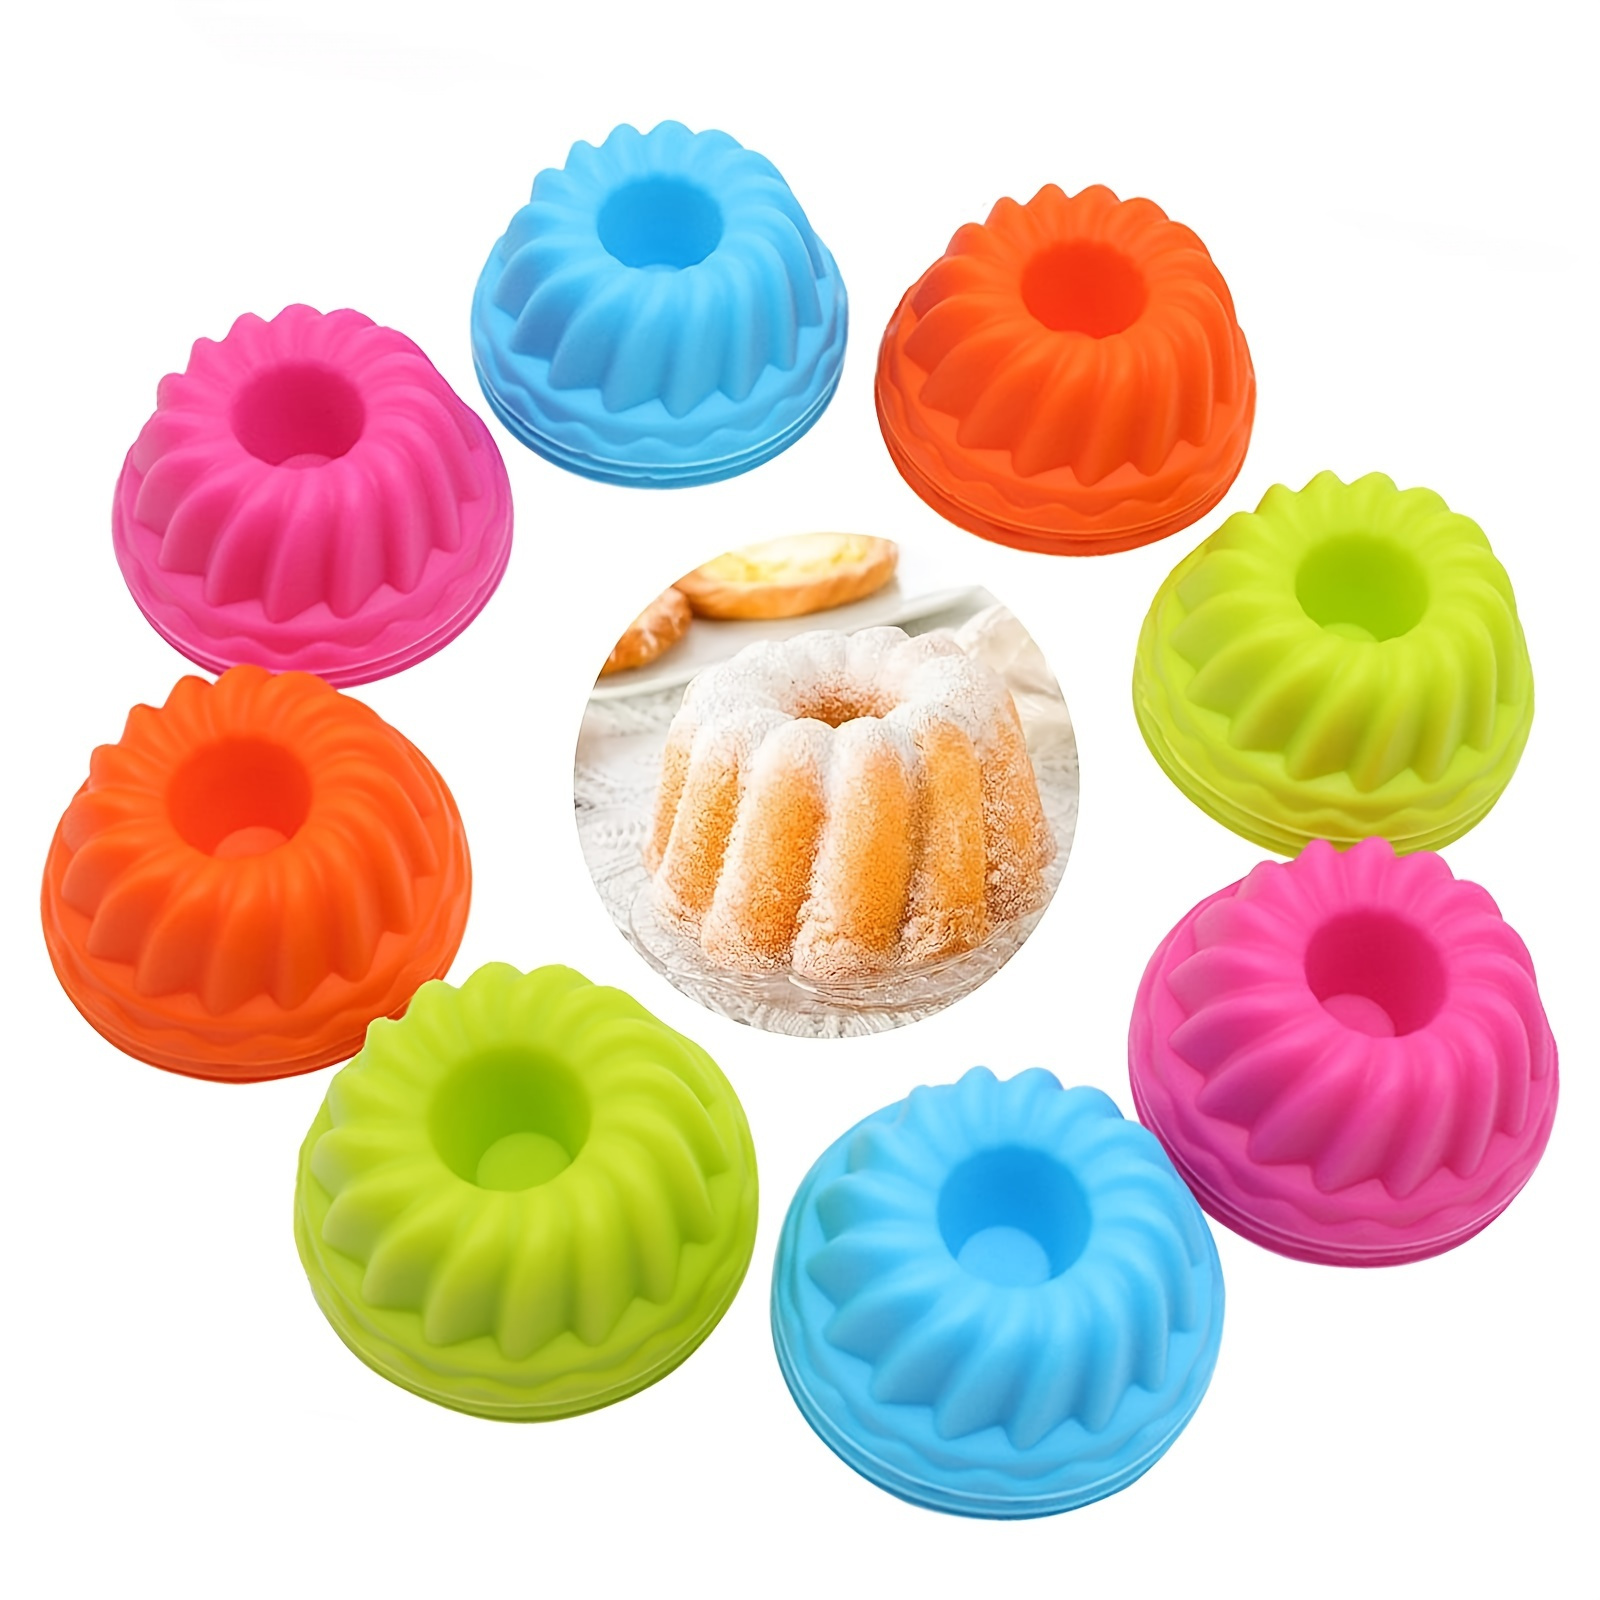 

12pcs Pack Of 12 2.5"x1.6"x1" Silicone Baking Cups, Mini Silicone Baking Cake Molds, Nonstick Cupcake Liners, Bpa Free Fancy Dessert Trays - Jelly & Muffins